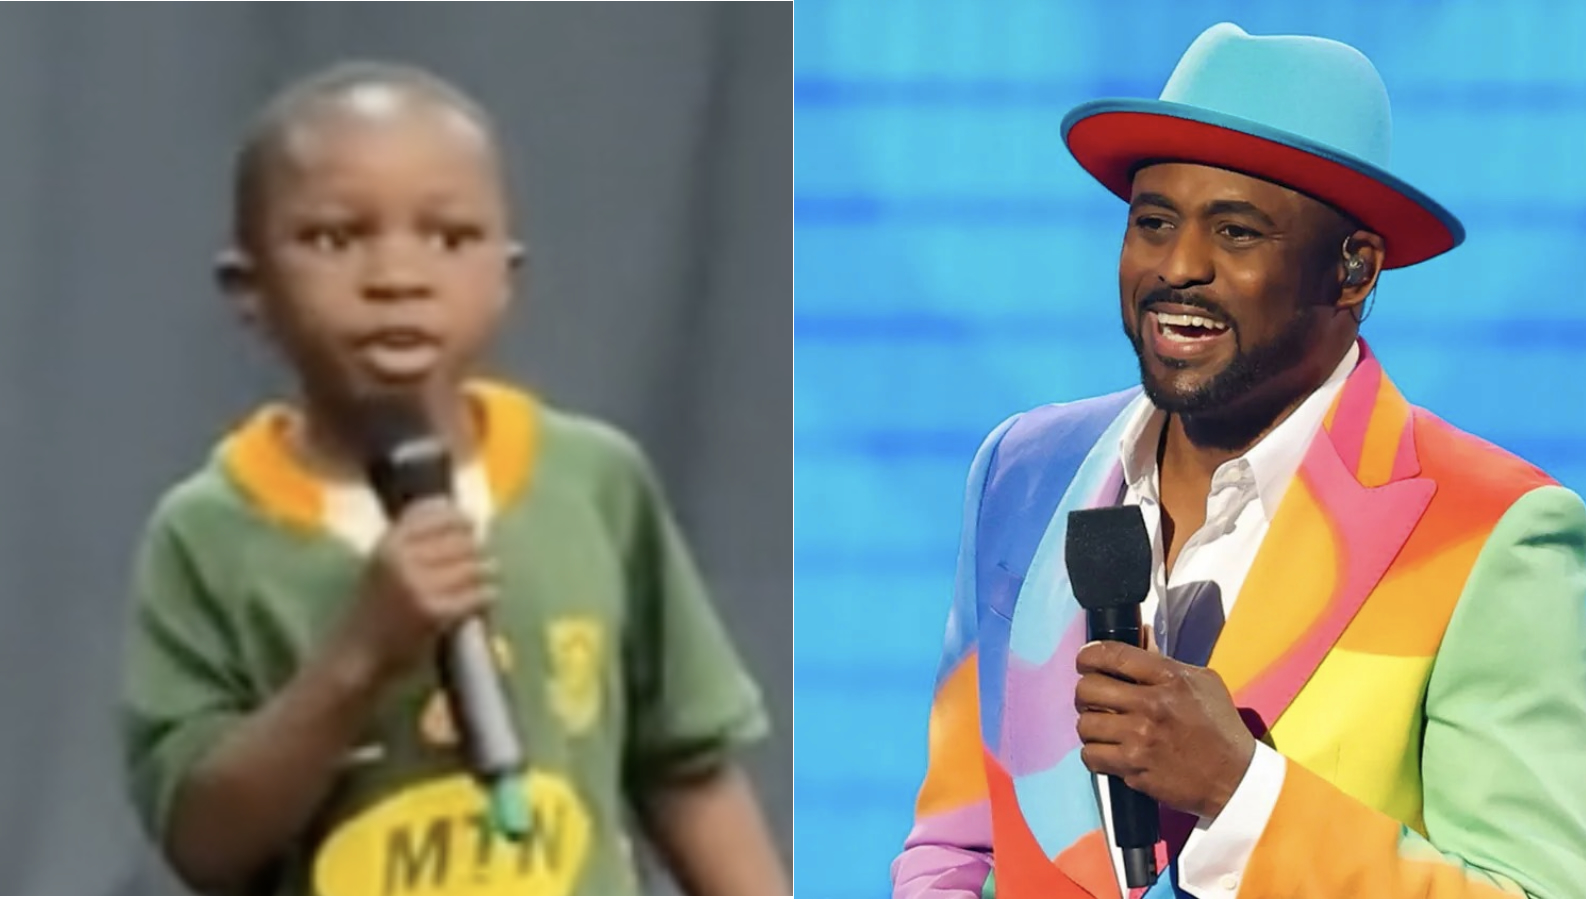 Watch: South African Sensation Goes Viral with "I Feel Good" Performance